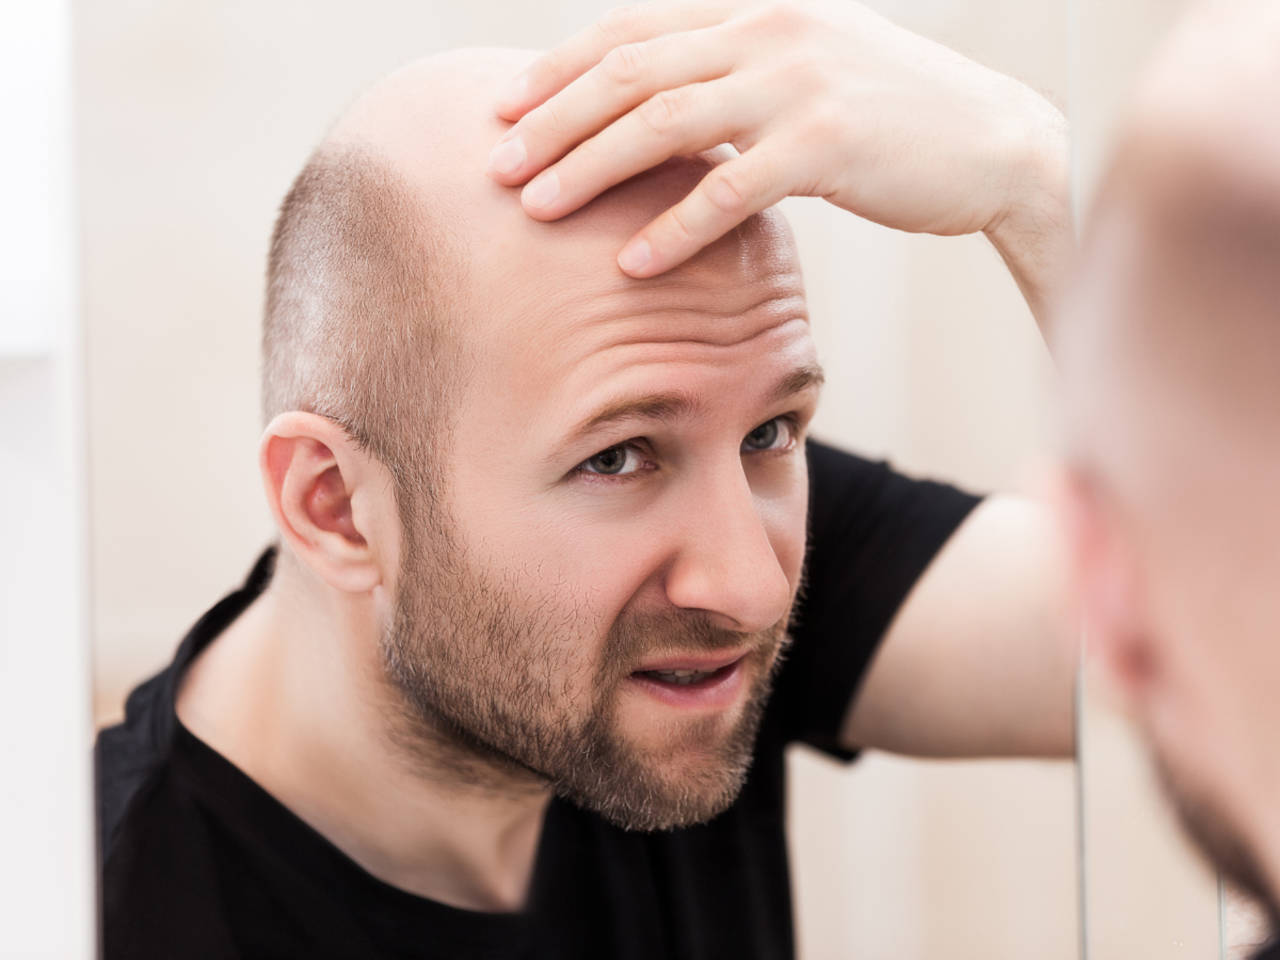 Hair loss Images and Stock Photos. 28,738 Hair loss photography and royalty  free pictures available to download from thousands of stock photo providers.